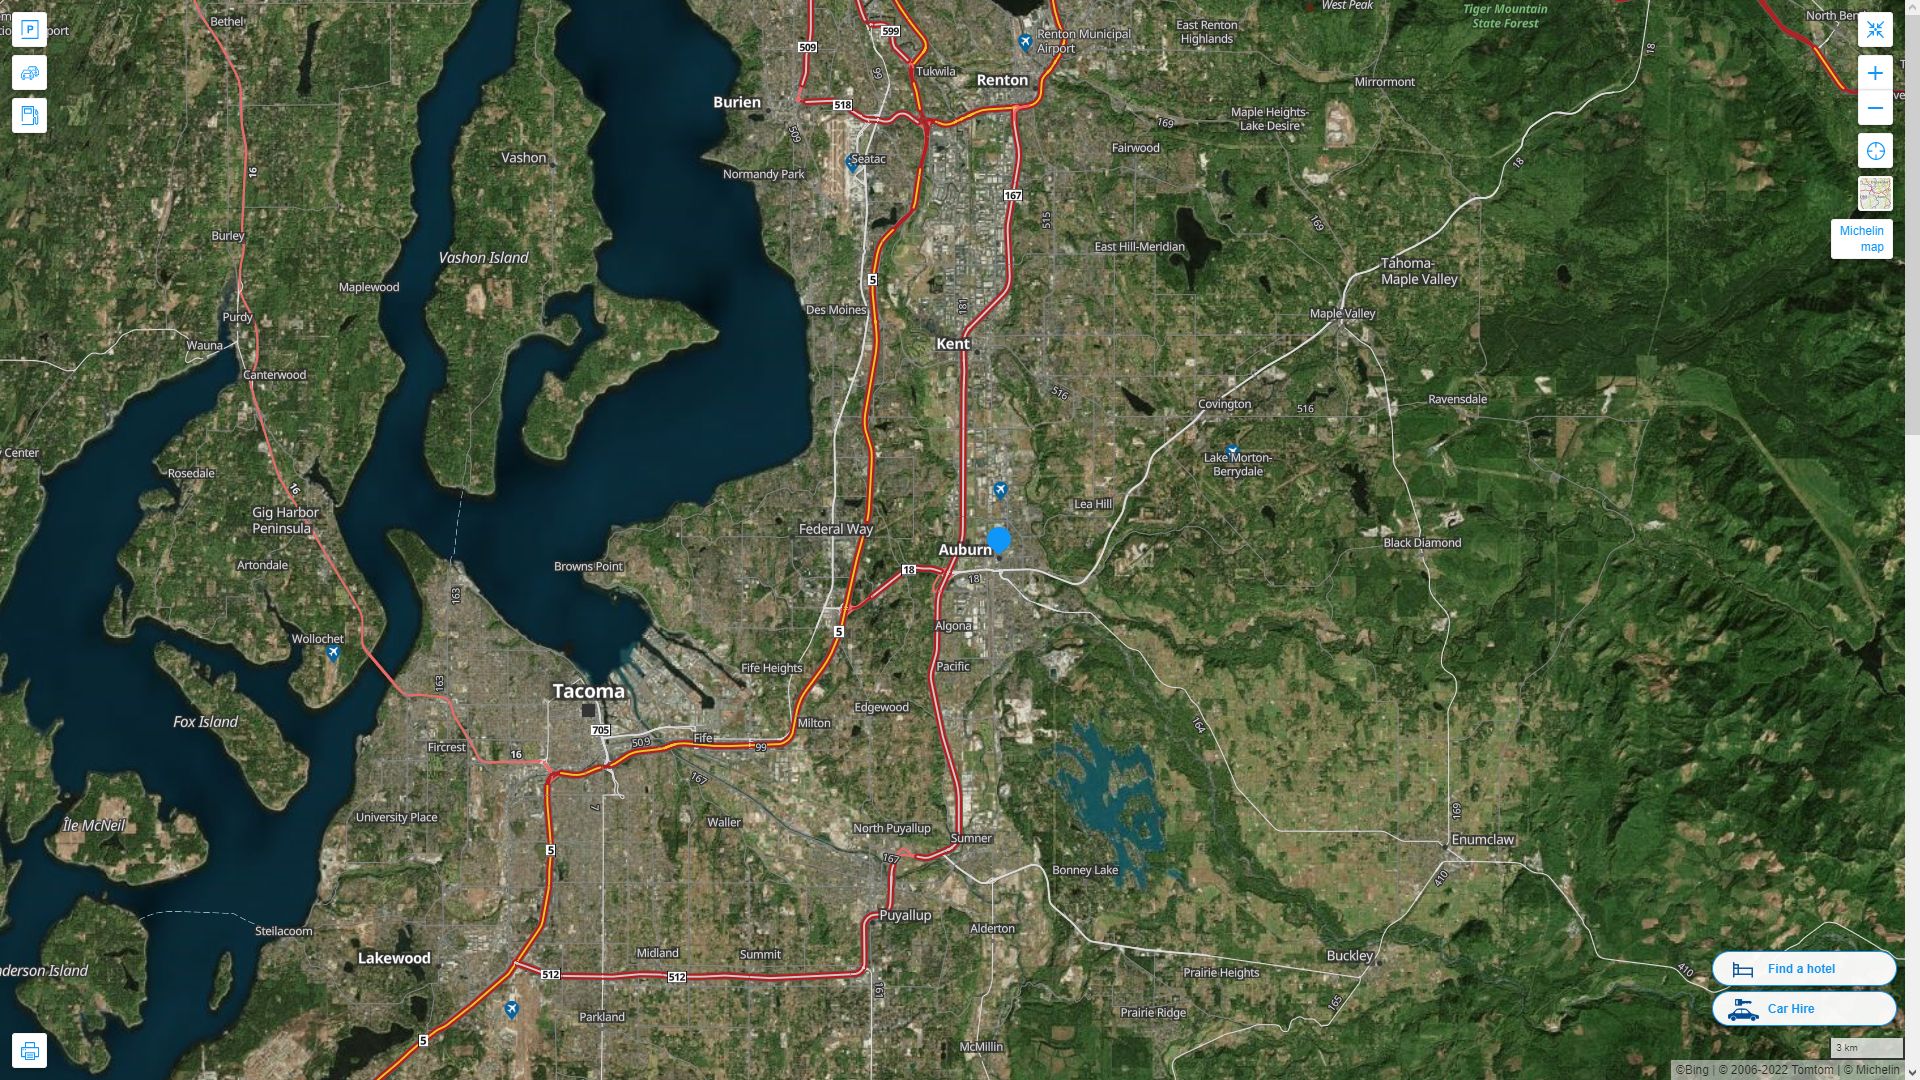 Auburn Washington Highway and Road Map with Satellite View